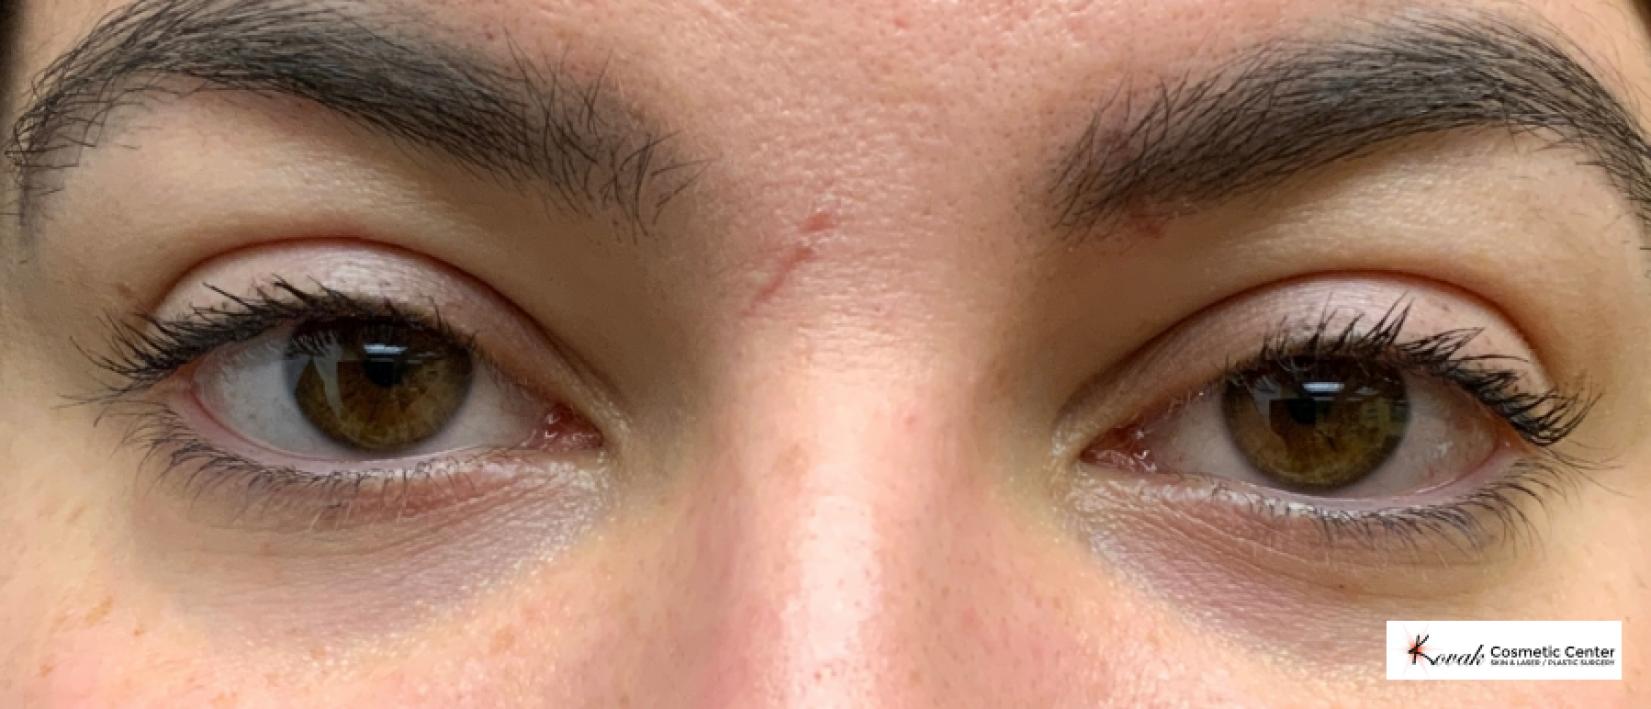 Dark Circle Treatment using Restylane Silk on a 23 year old Female - Before 